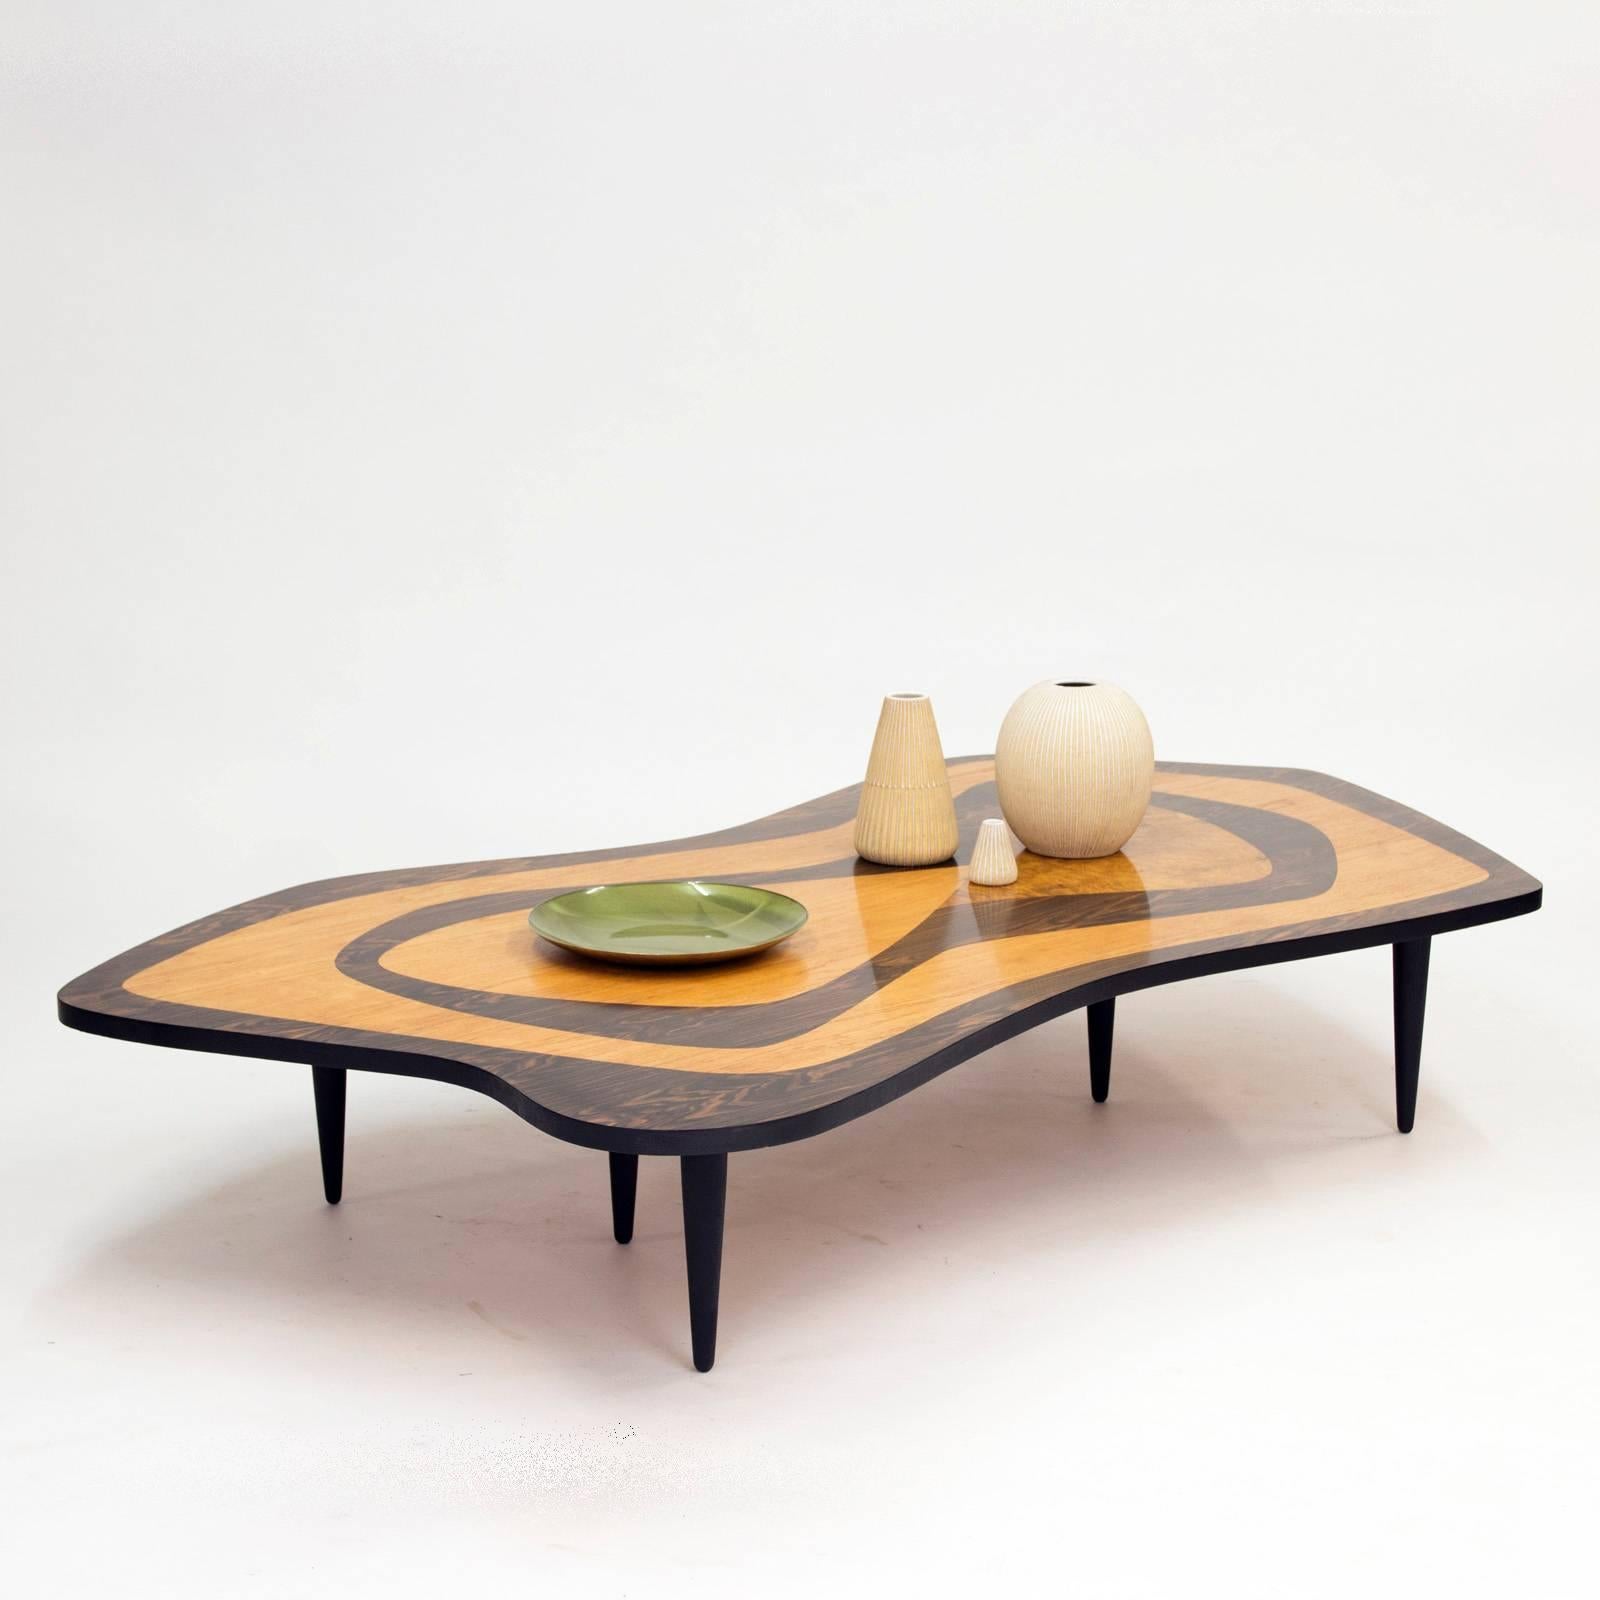 Amazing Swedish 1950s intarsia coffee table, in a remarkable size and design! The organic shaped tabletop has inlays of rosewood, birch root and elm in a striking graphic pattern. Supported by six legs.